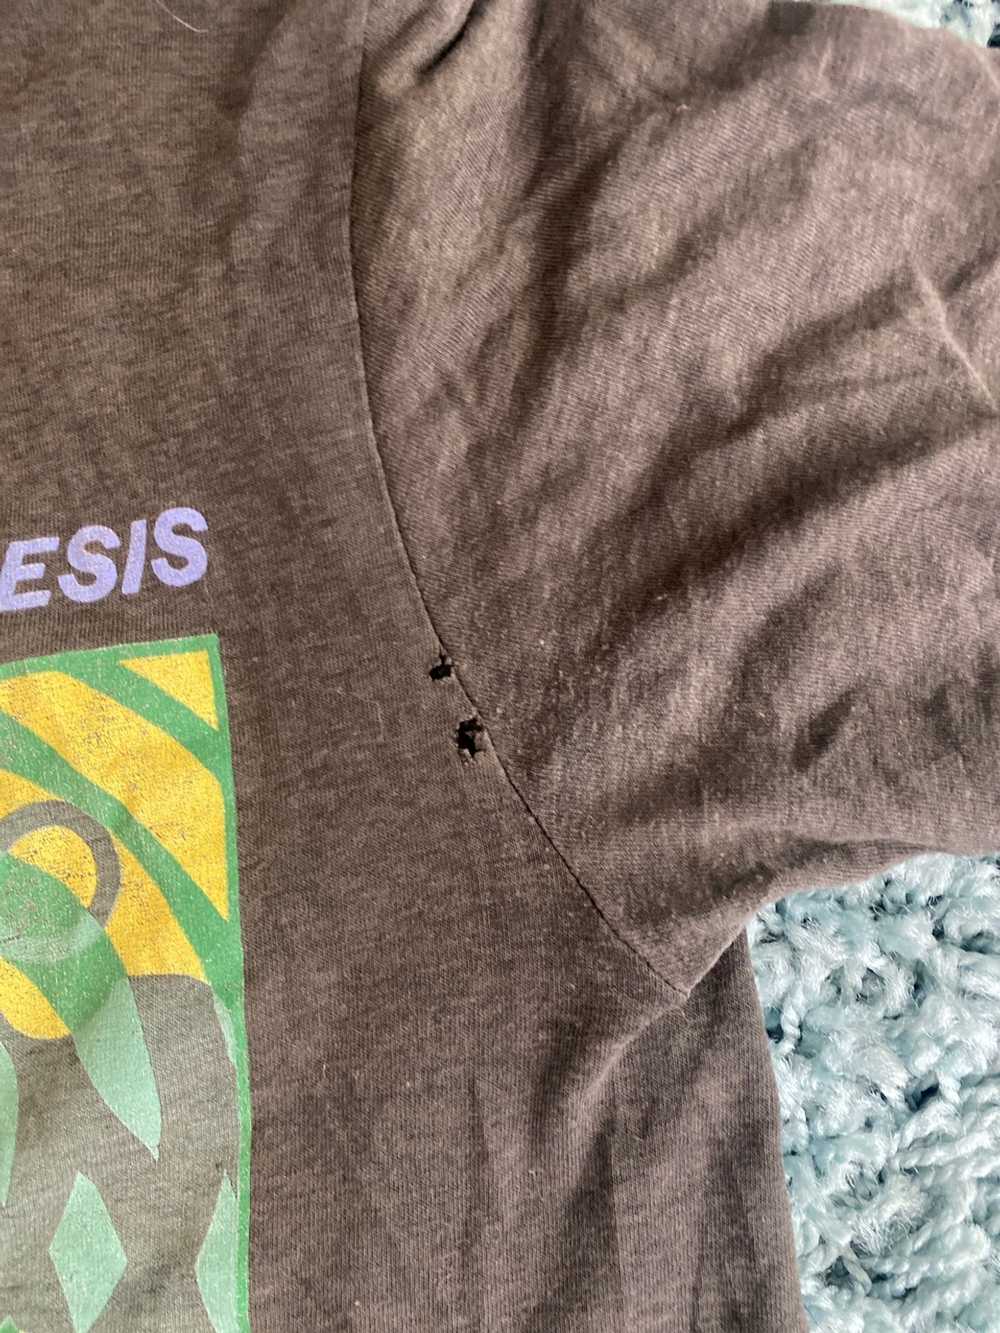 Vintage 1986 GENESIS INVISIBLE TOUCH SHIRT - image 3